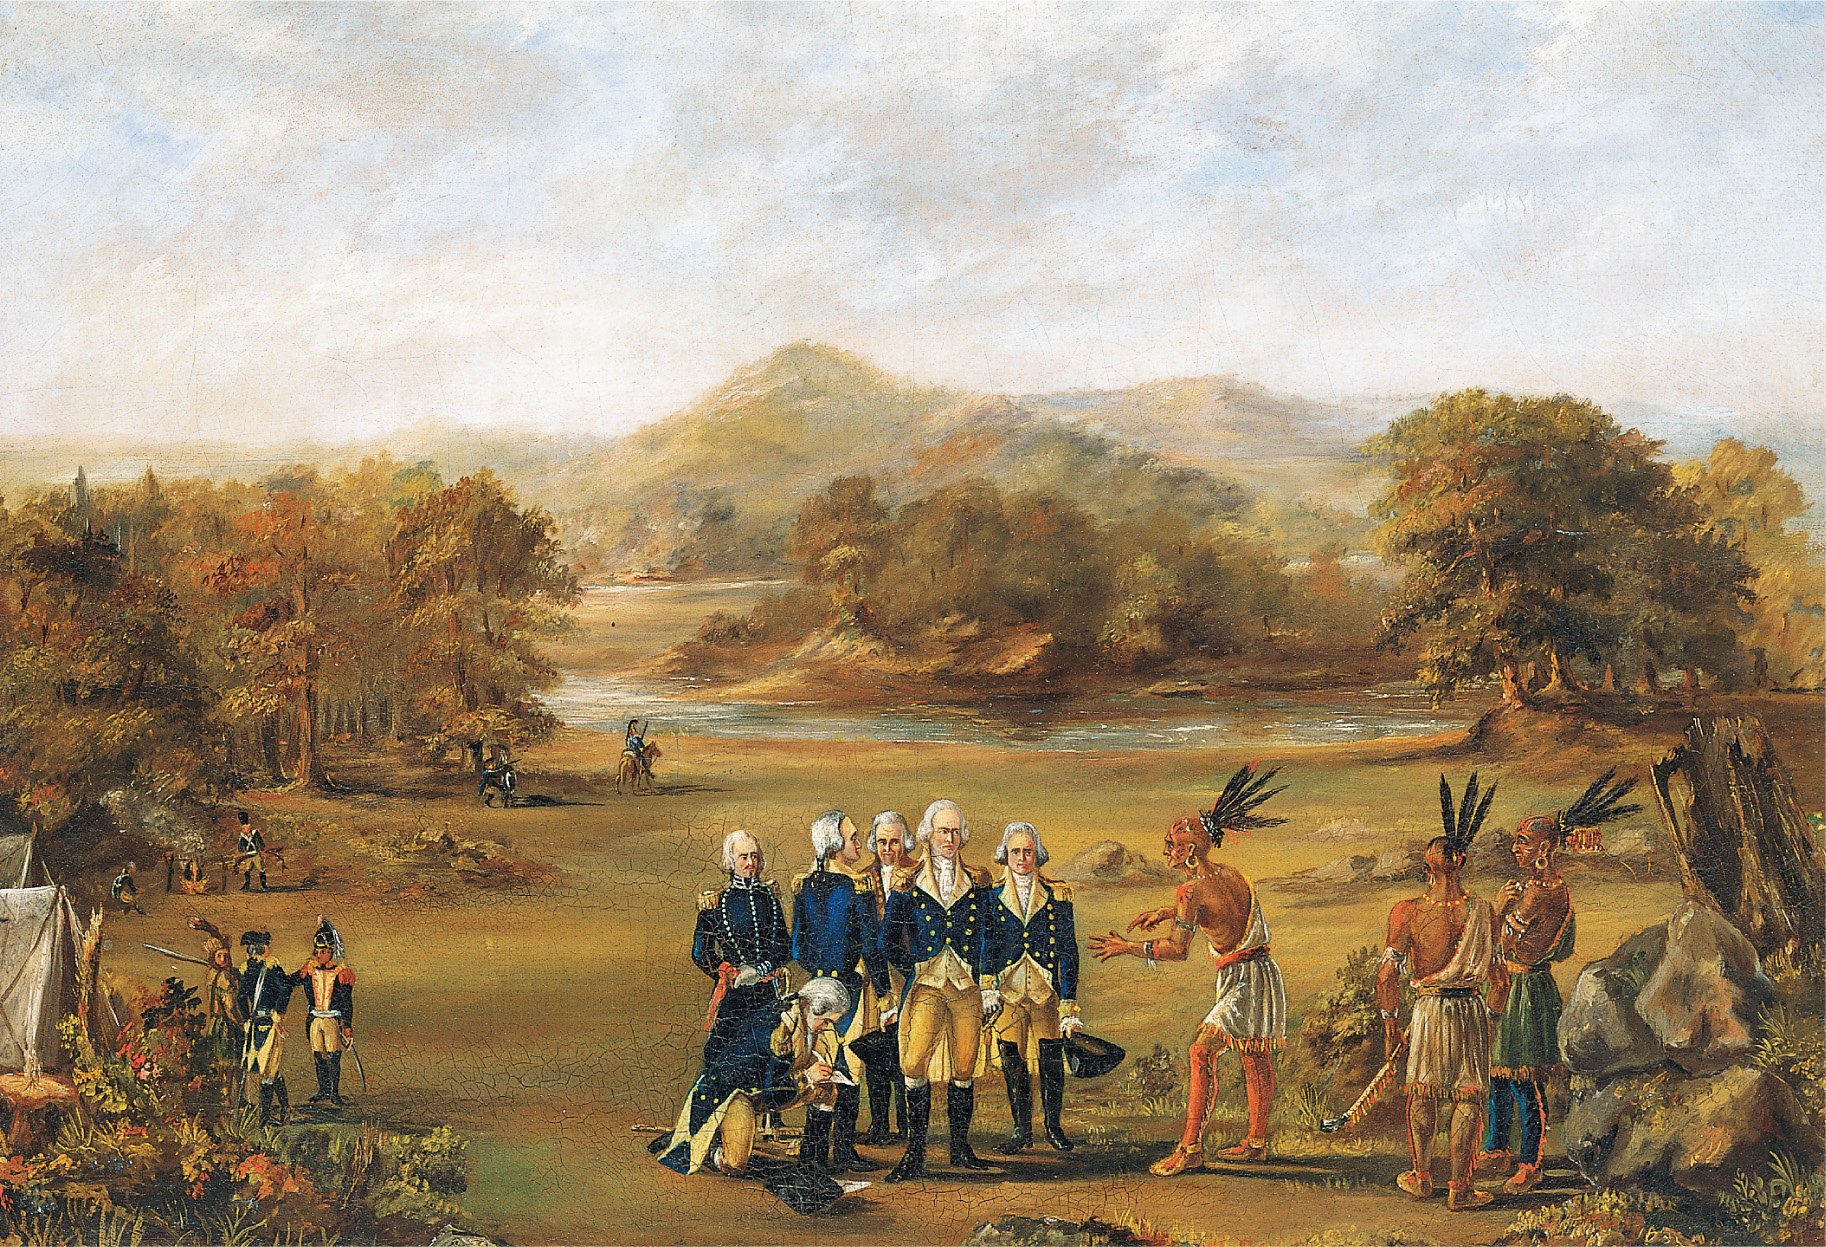 A painting: Natives with feathered headdresses meet in a
clearing with white-wigged soldiers in long blue coats.